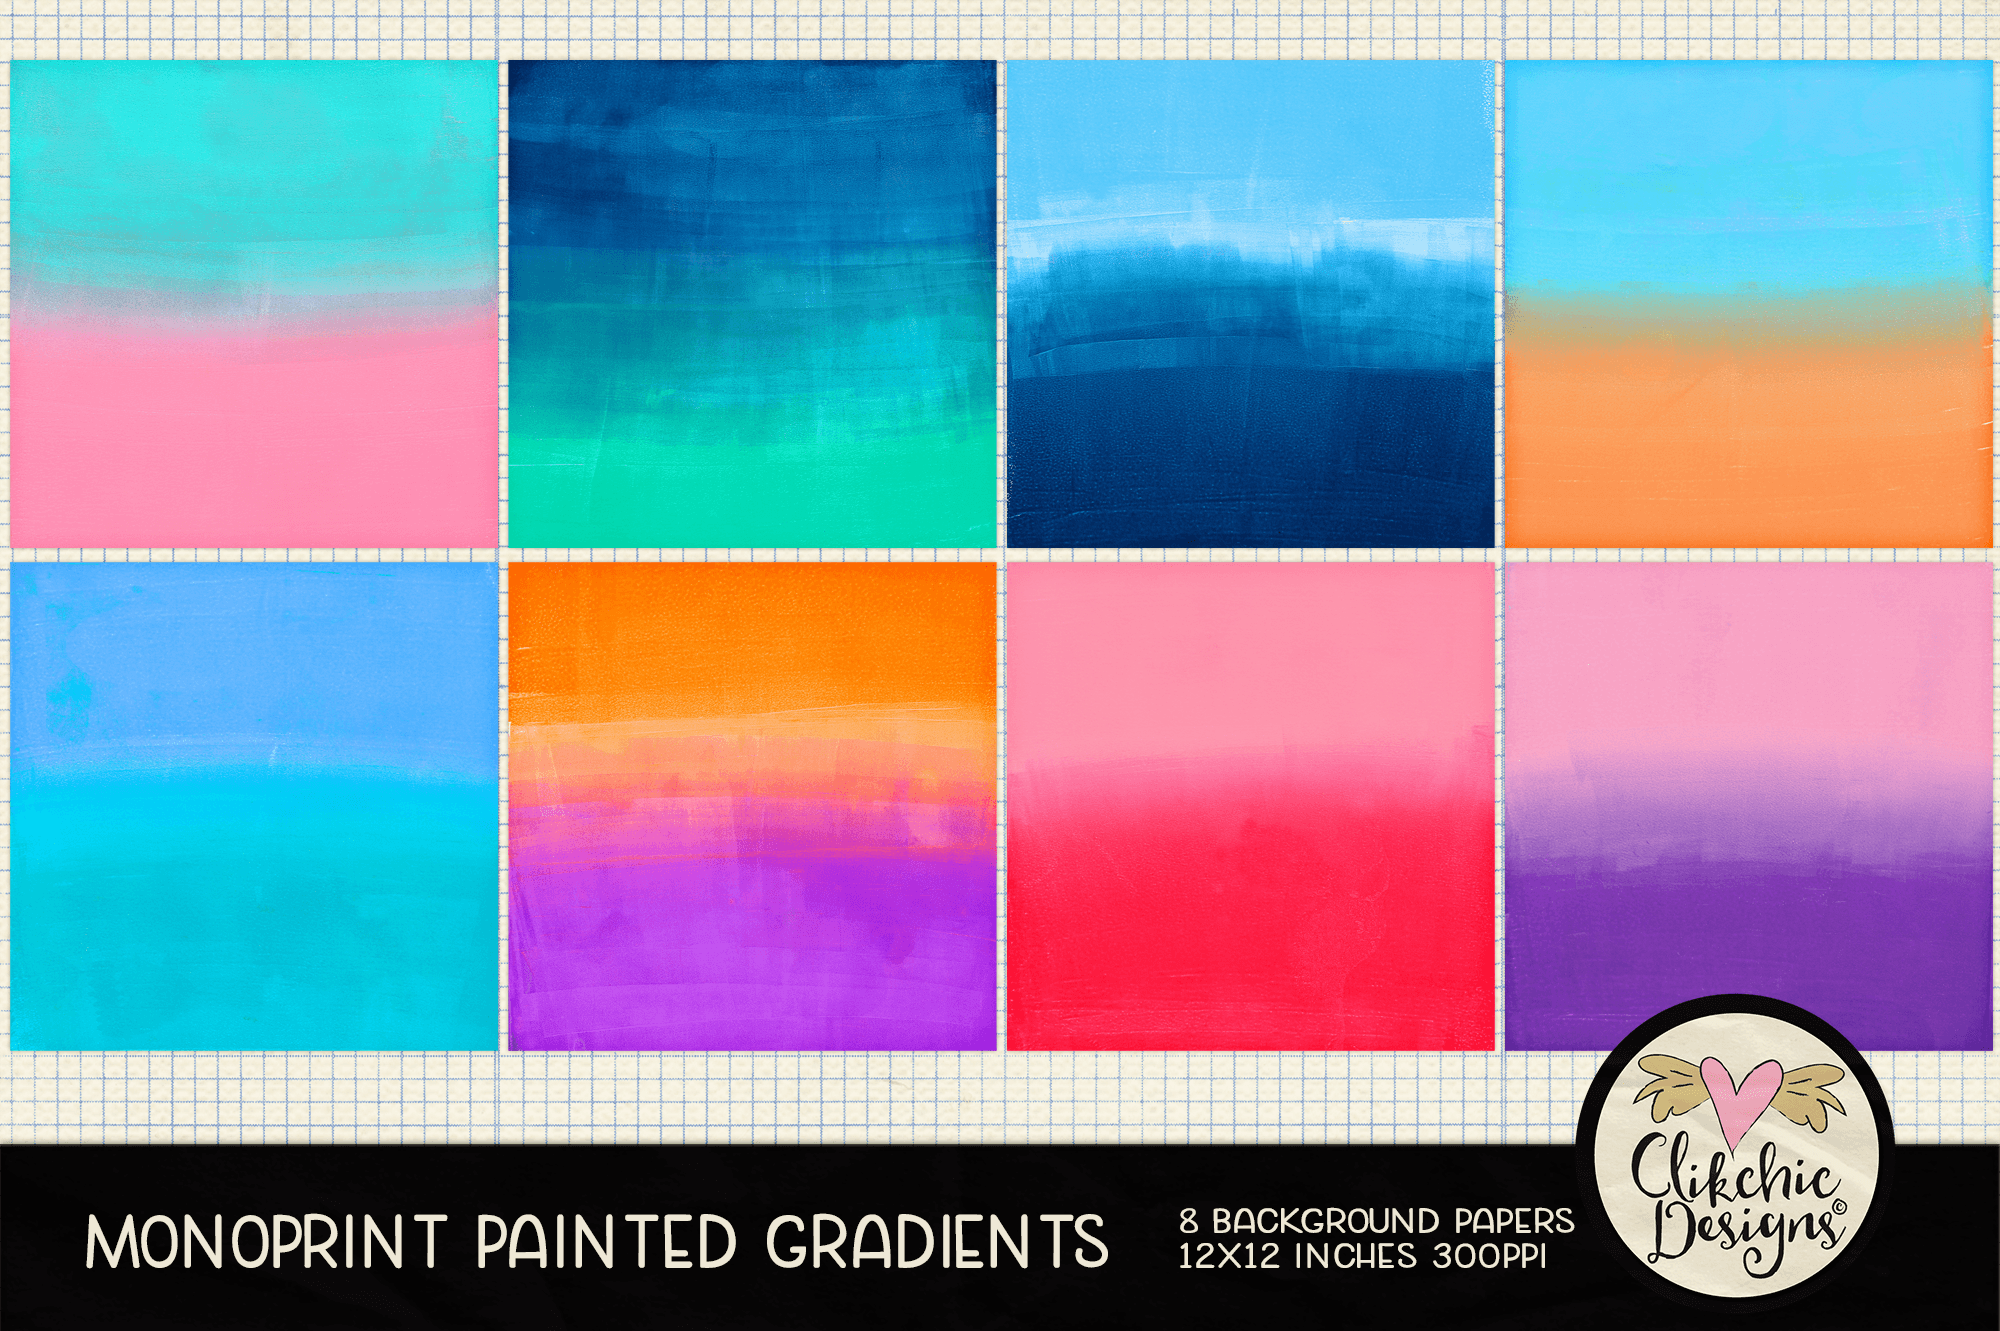 Monoprint Painted Gradients Backgrounds by Clikchic Designs